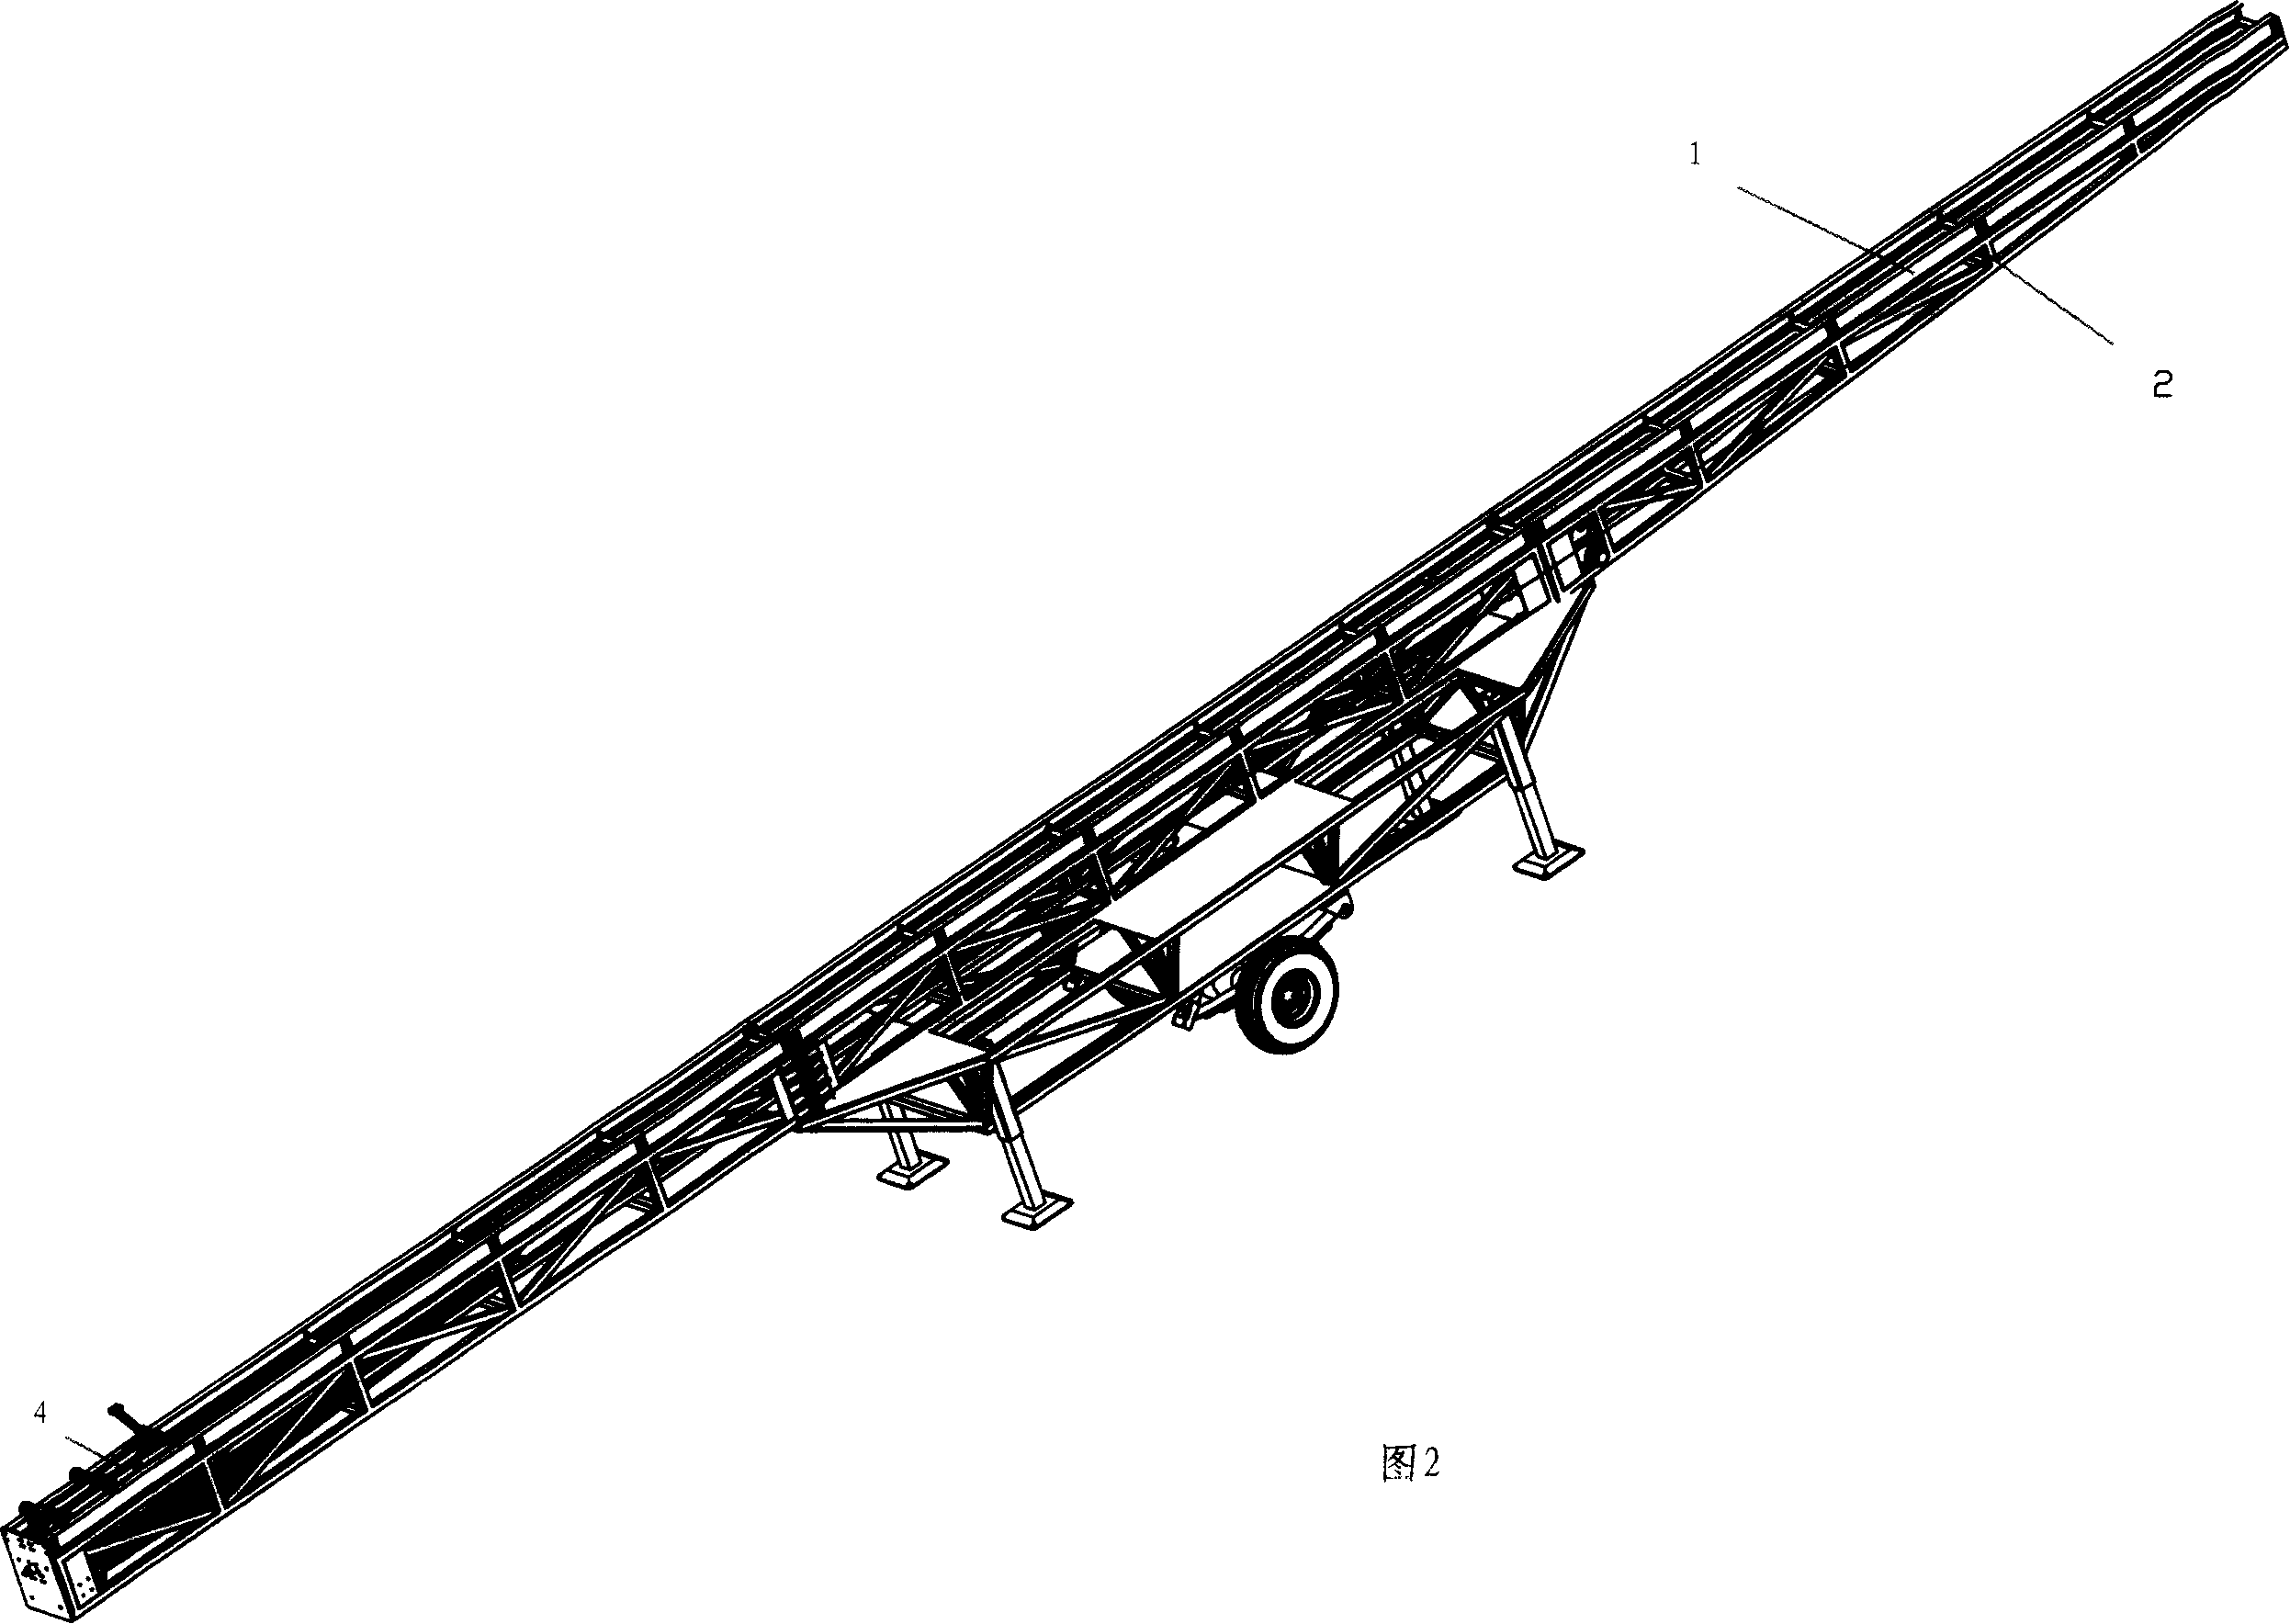 Unmanned aerial plane launching system and method